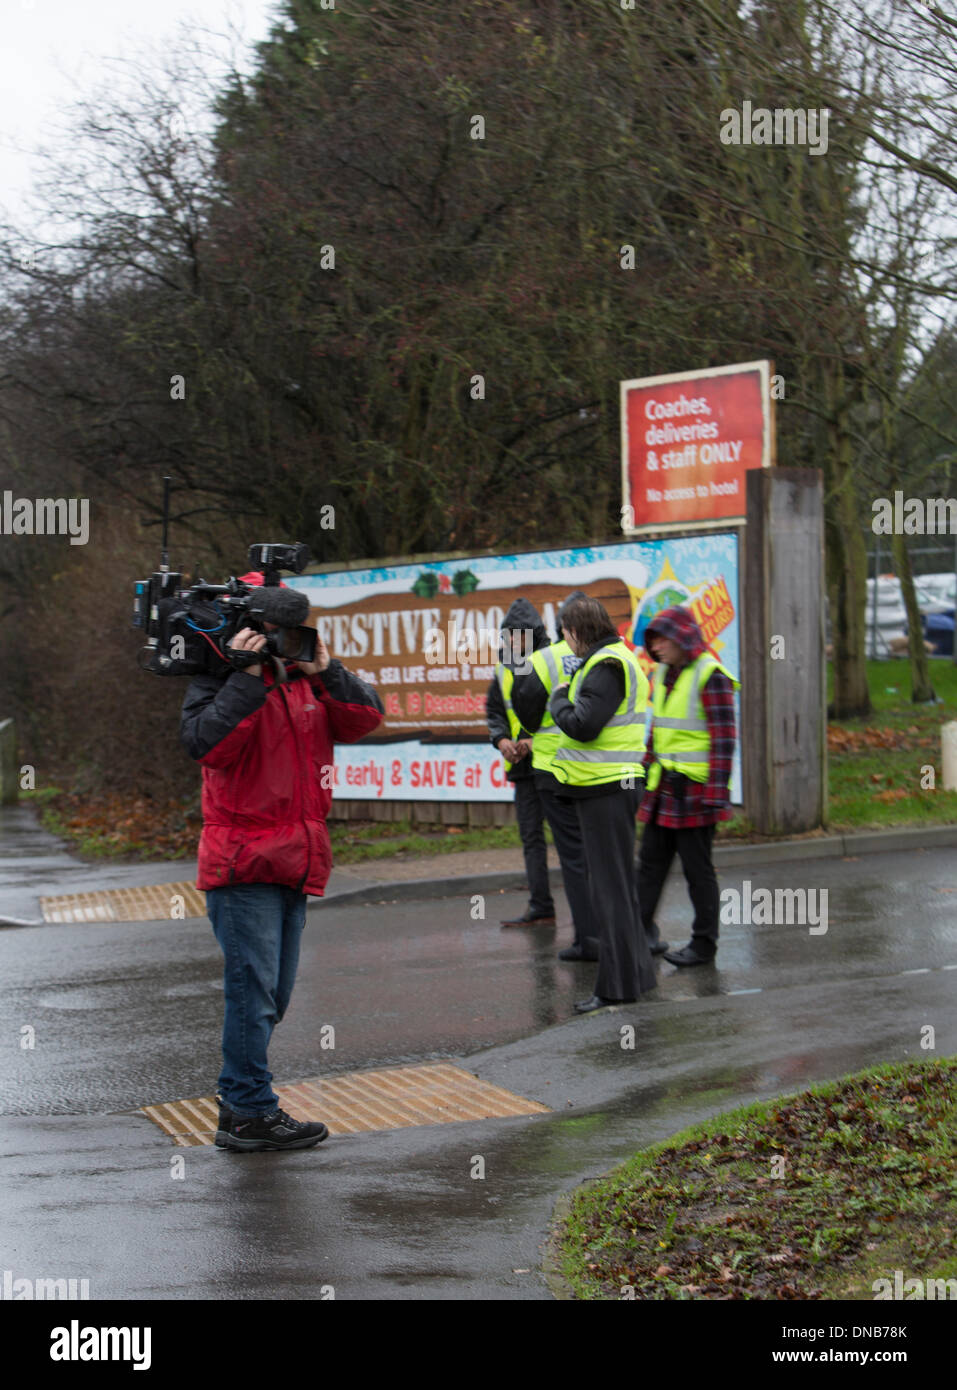 Chessington, Surrey, UK. 21st Dec 2013.  Security and television news crews at the entrance to Chessington World of Adventure after a fire reported on the news to be in the cafe. Credit:  Colin Hutchings/Alamy Live News Stock Photo